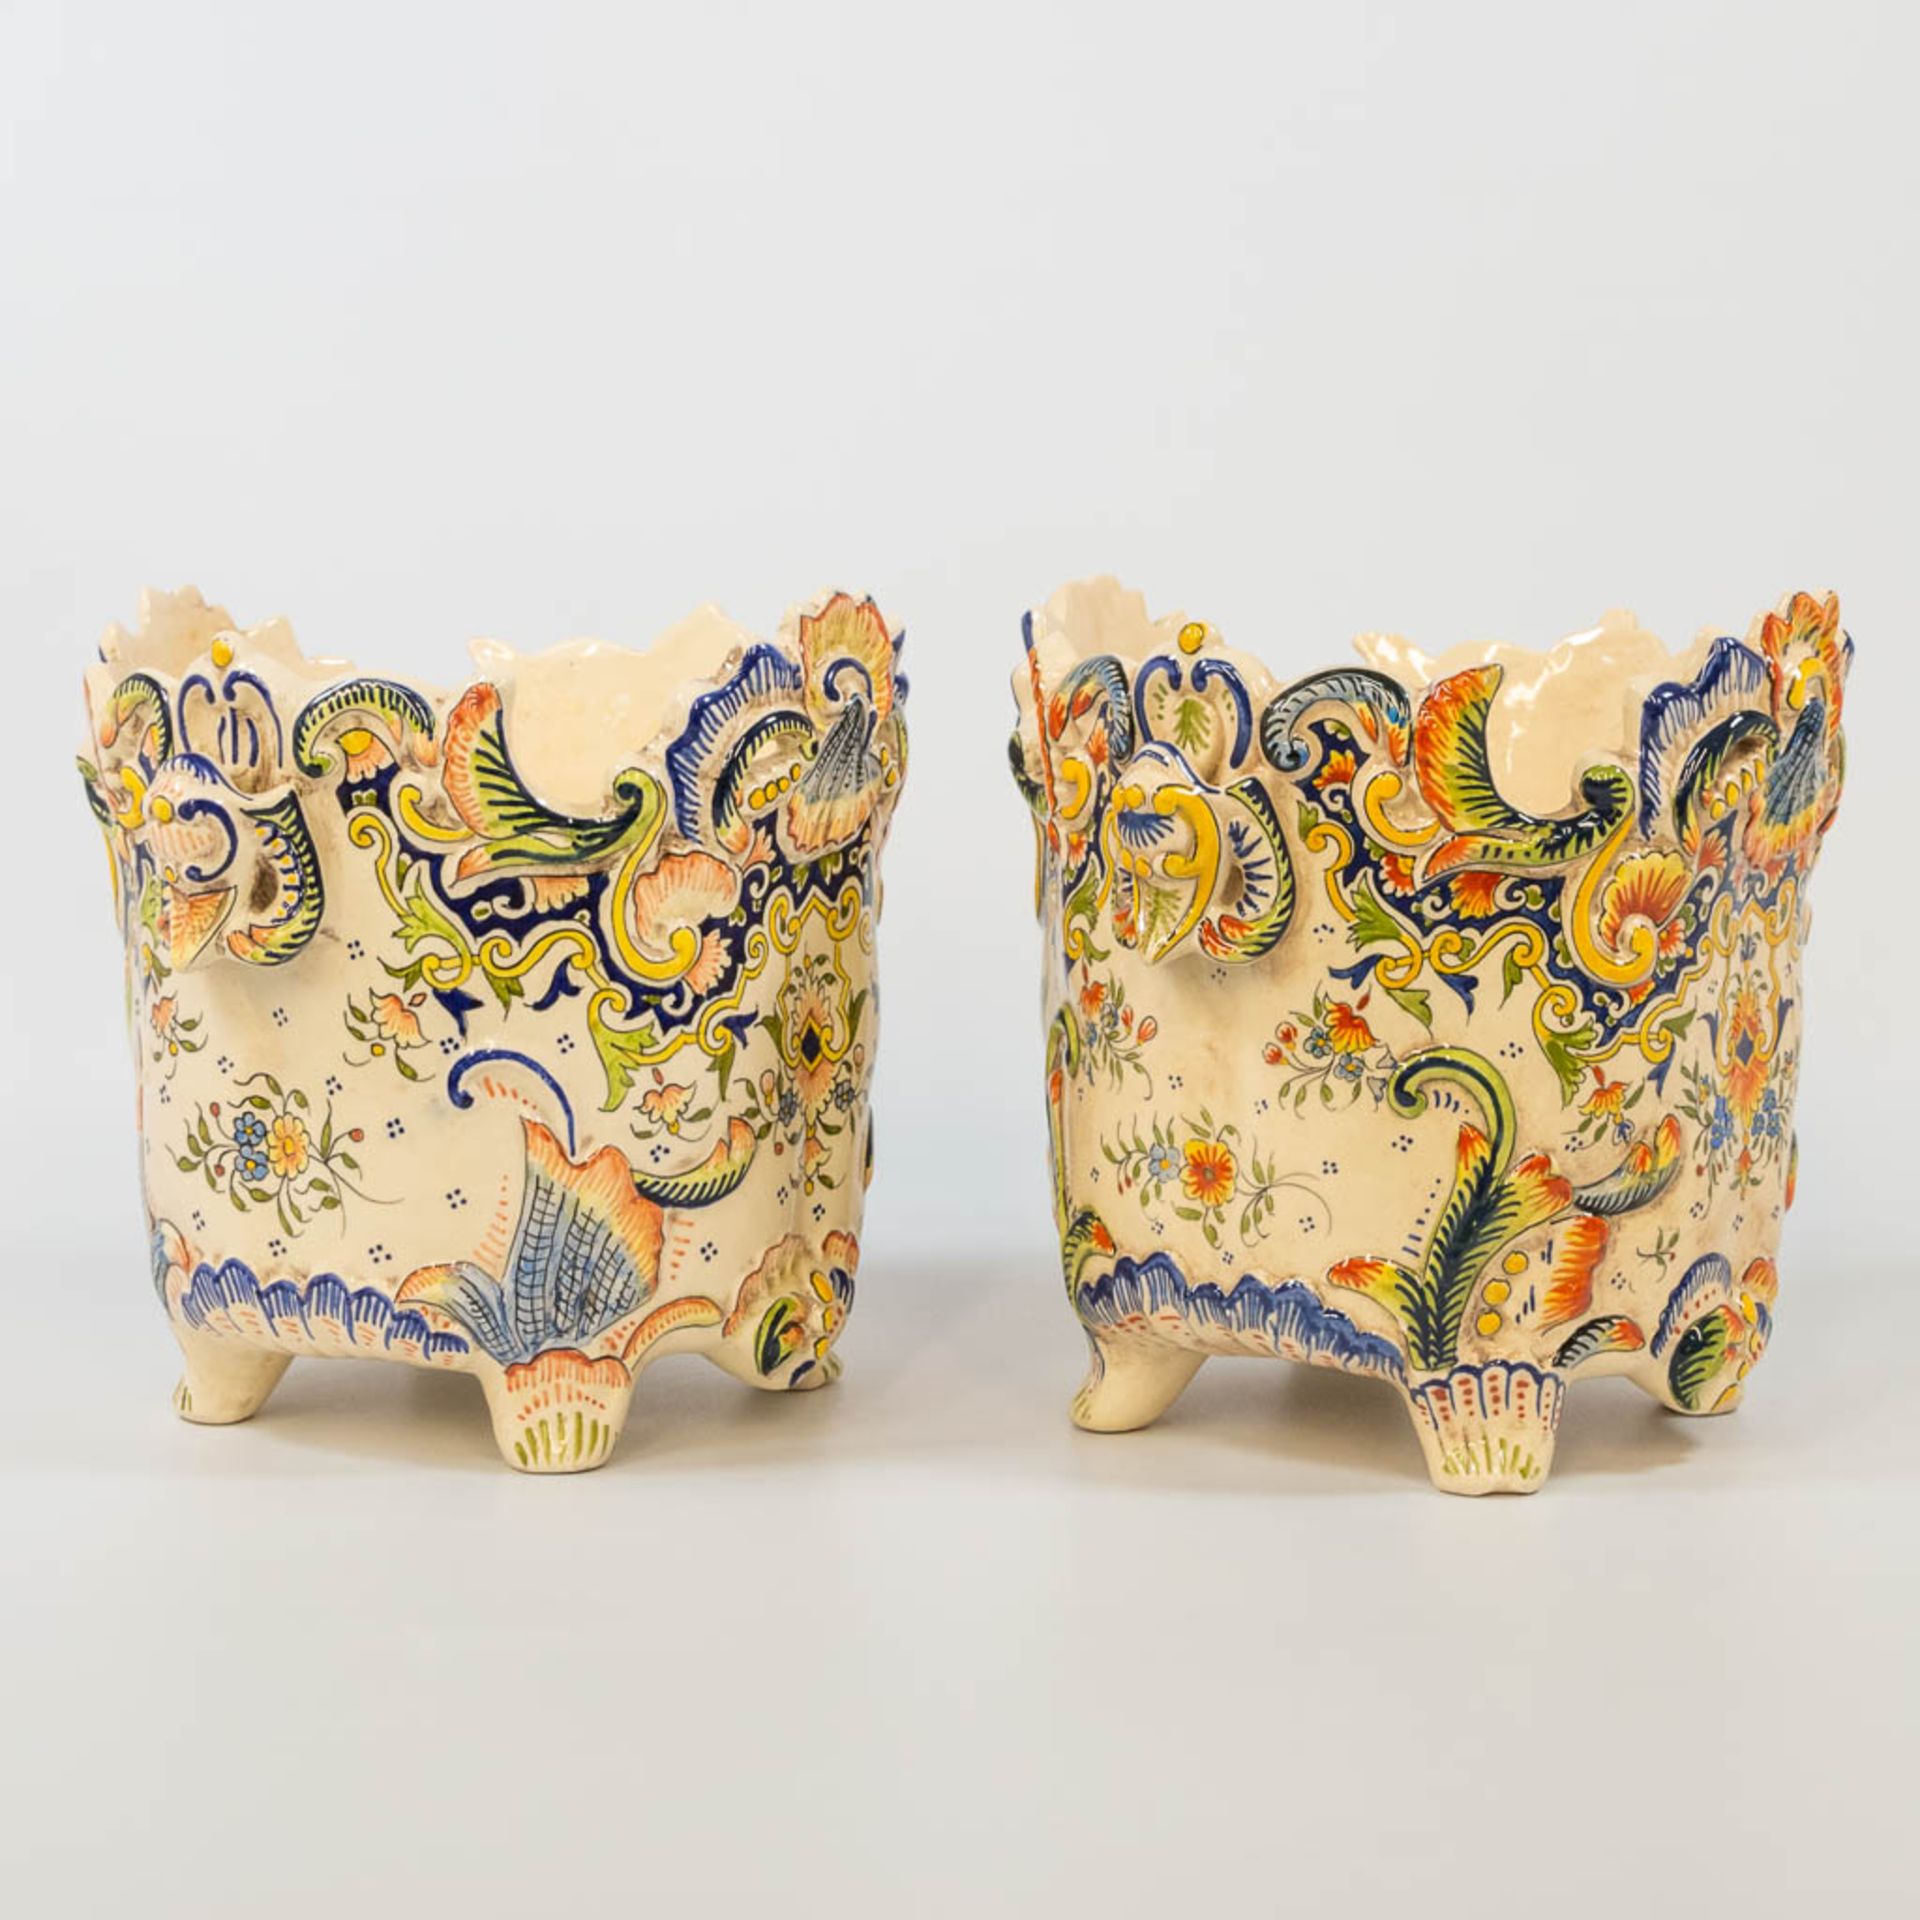 A pair of cache-pots with hand-painted decor, made of faience in Rouen, France. (23 x 27 x 22 cm) - Bild 13 aus 17